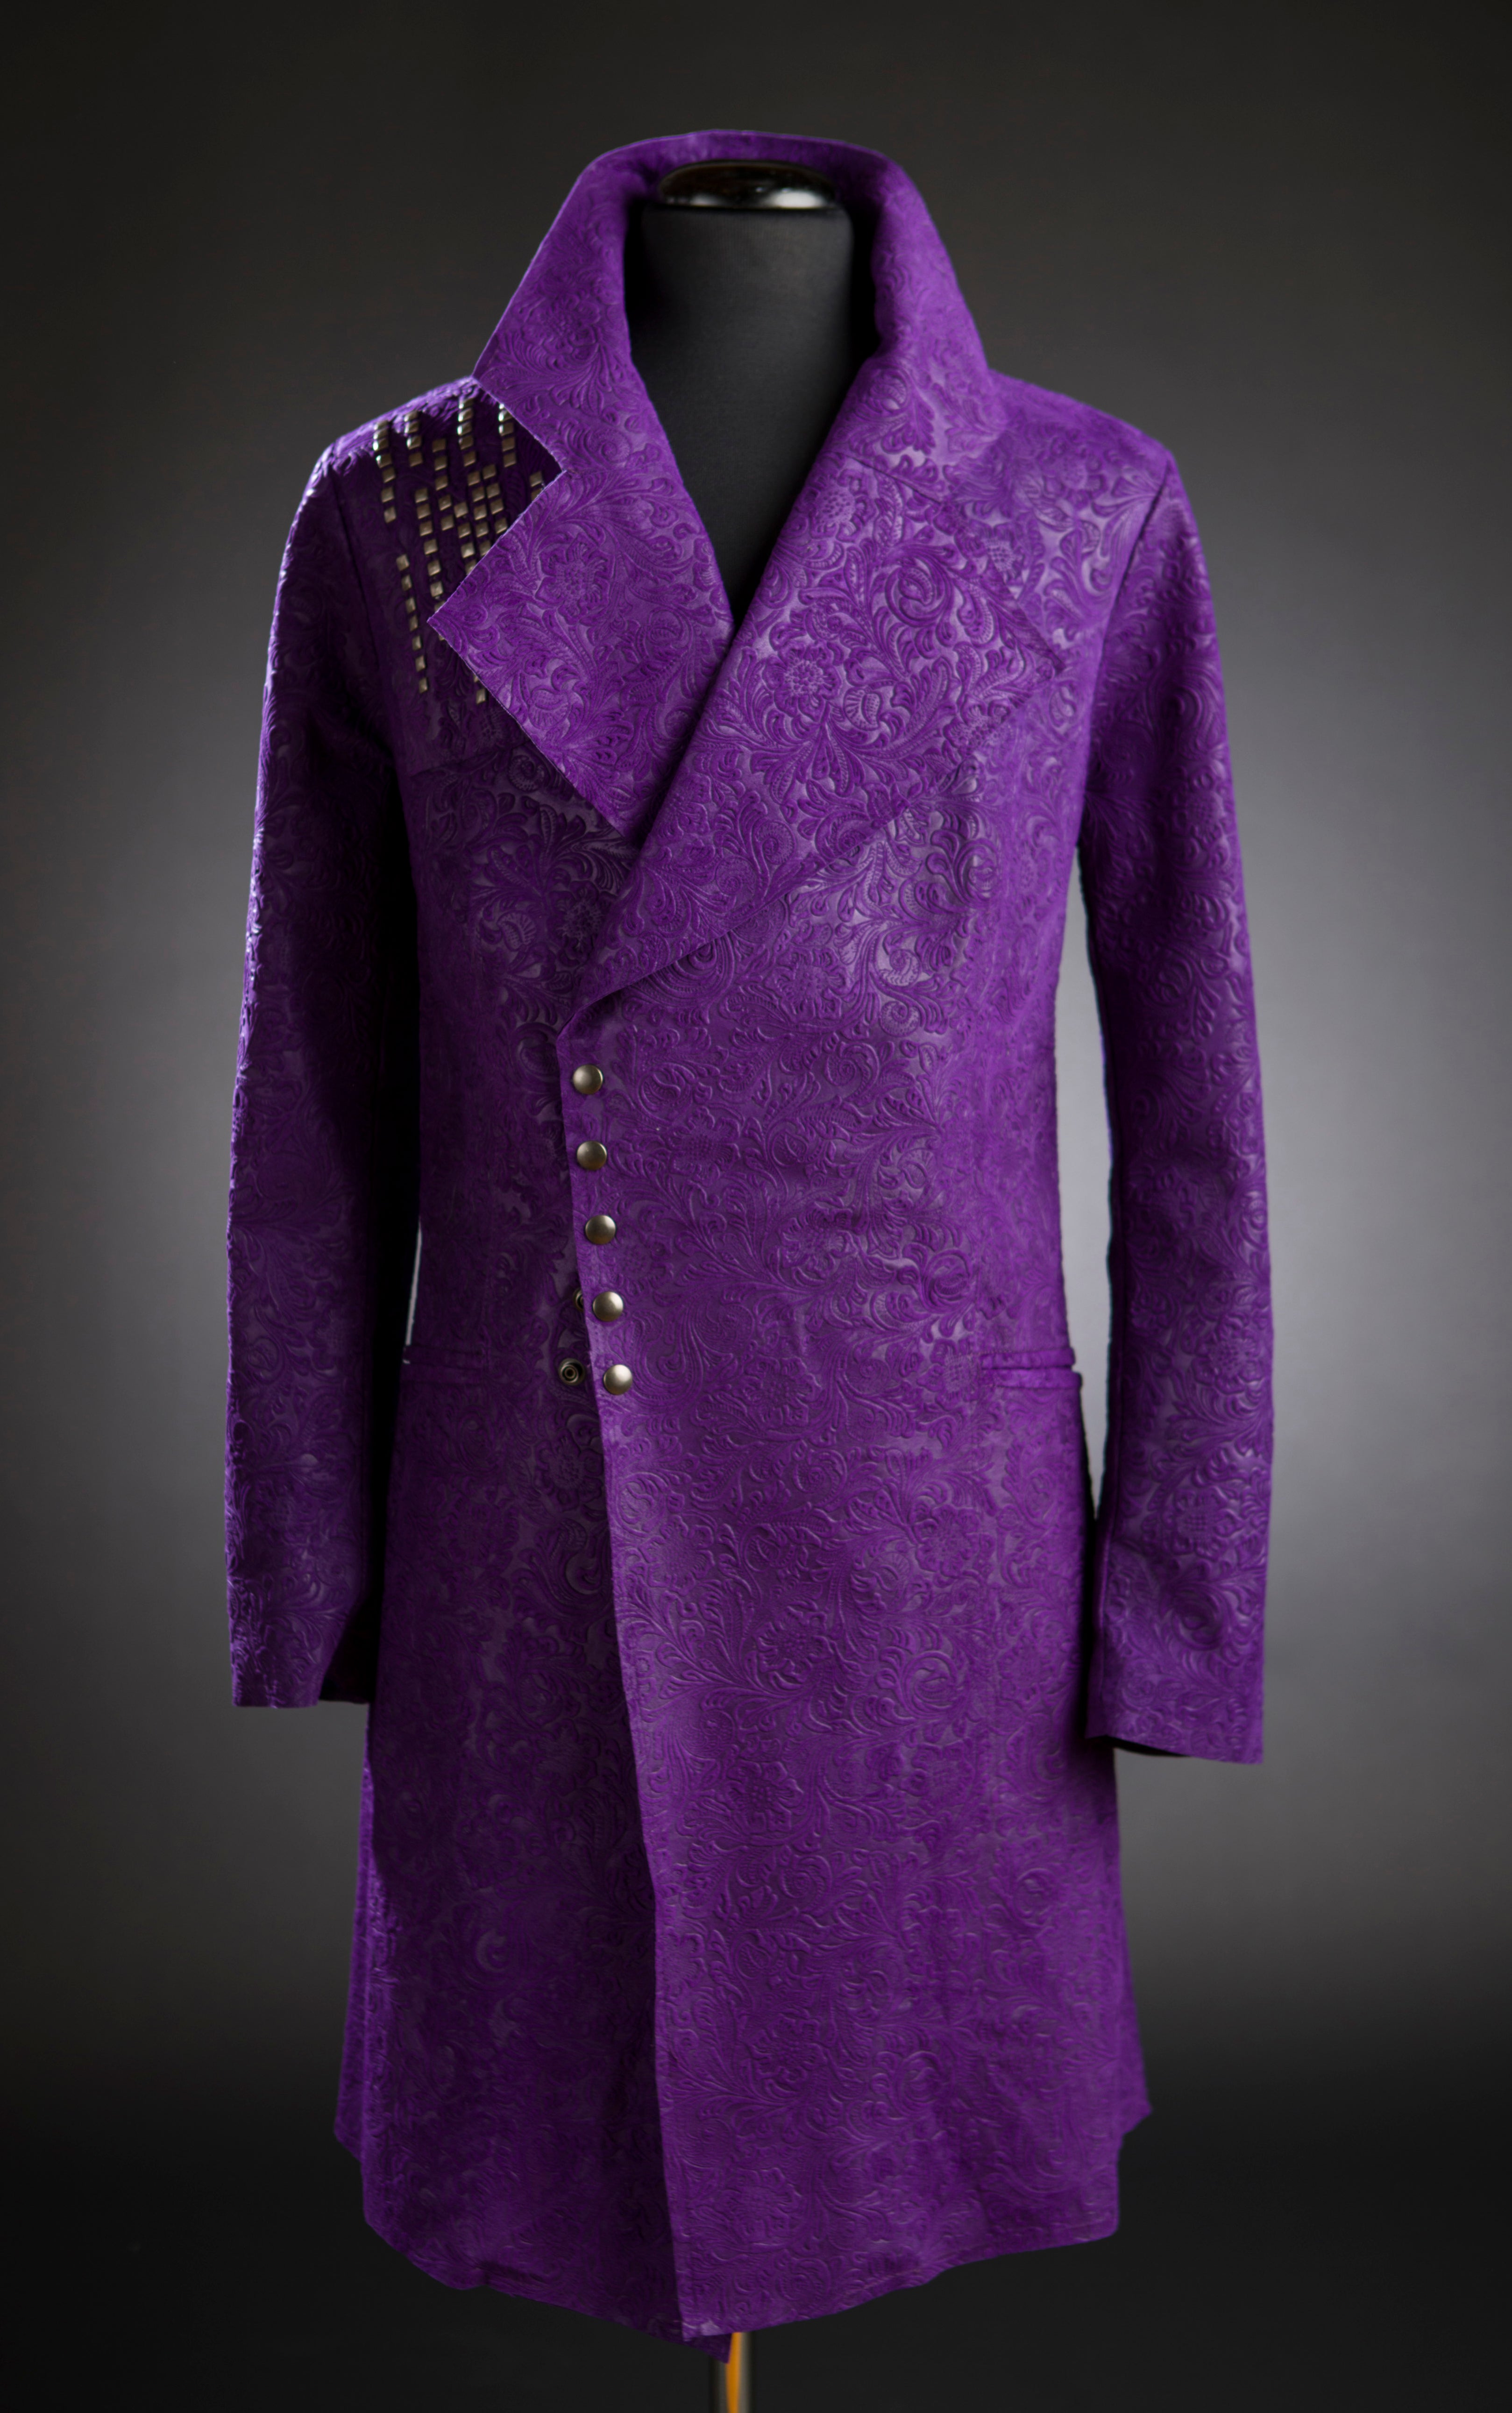 Prince Estate Releases Capsule Collection Created By Trusted Designers